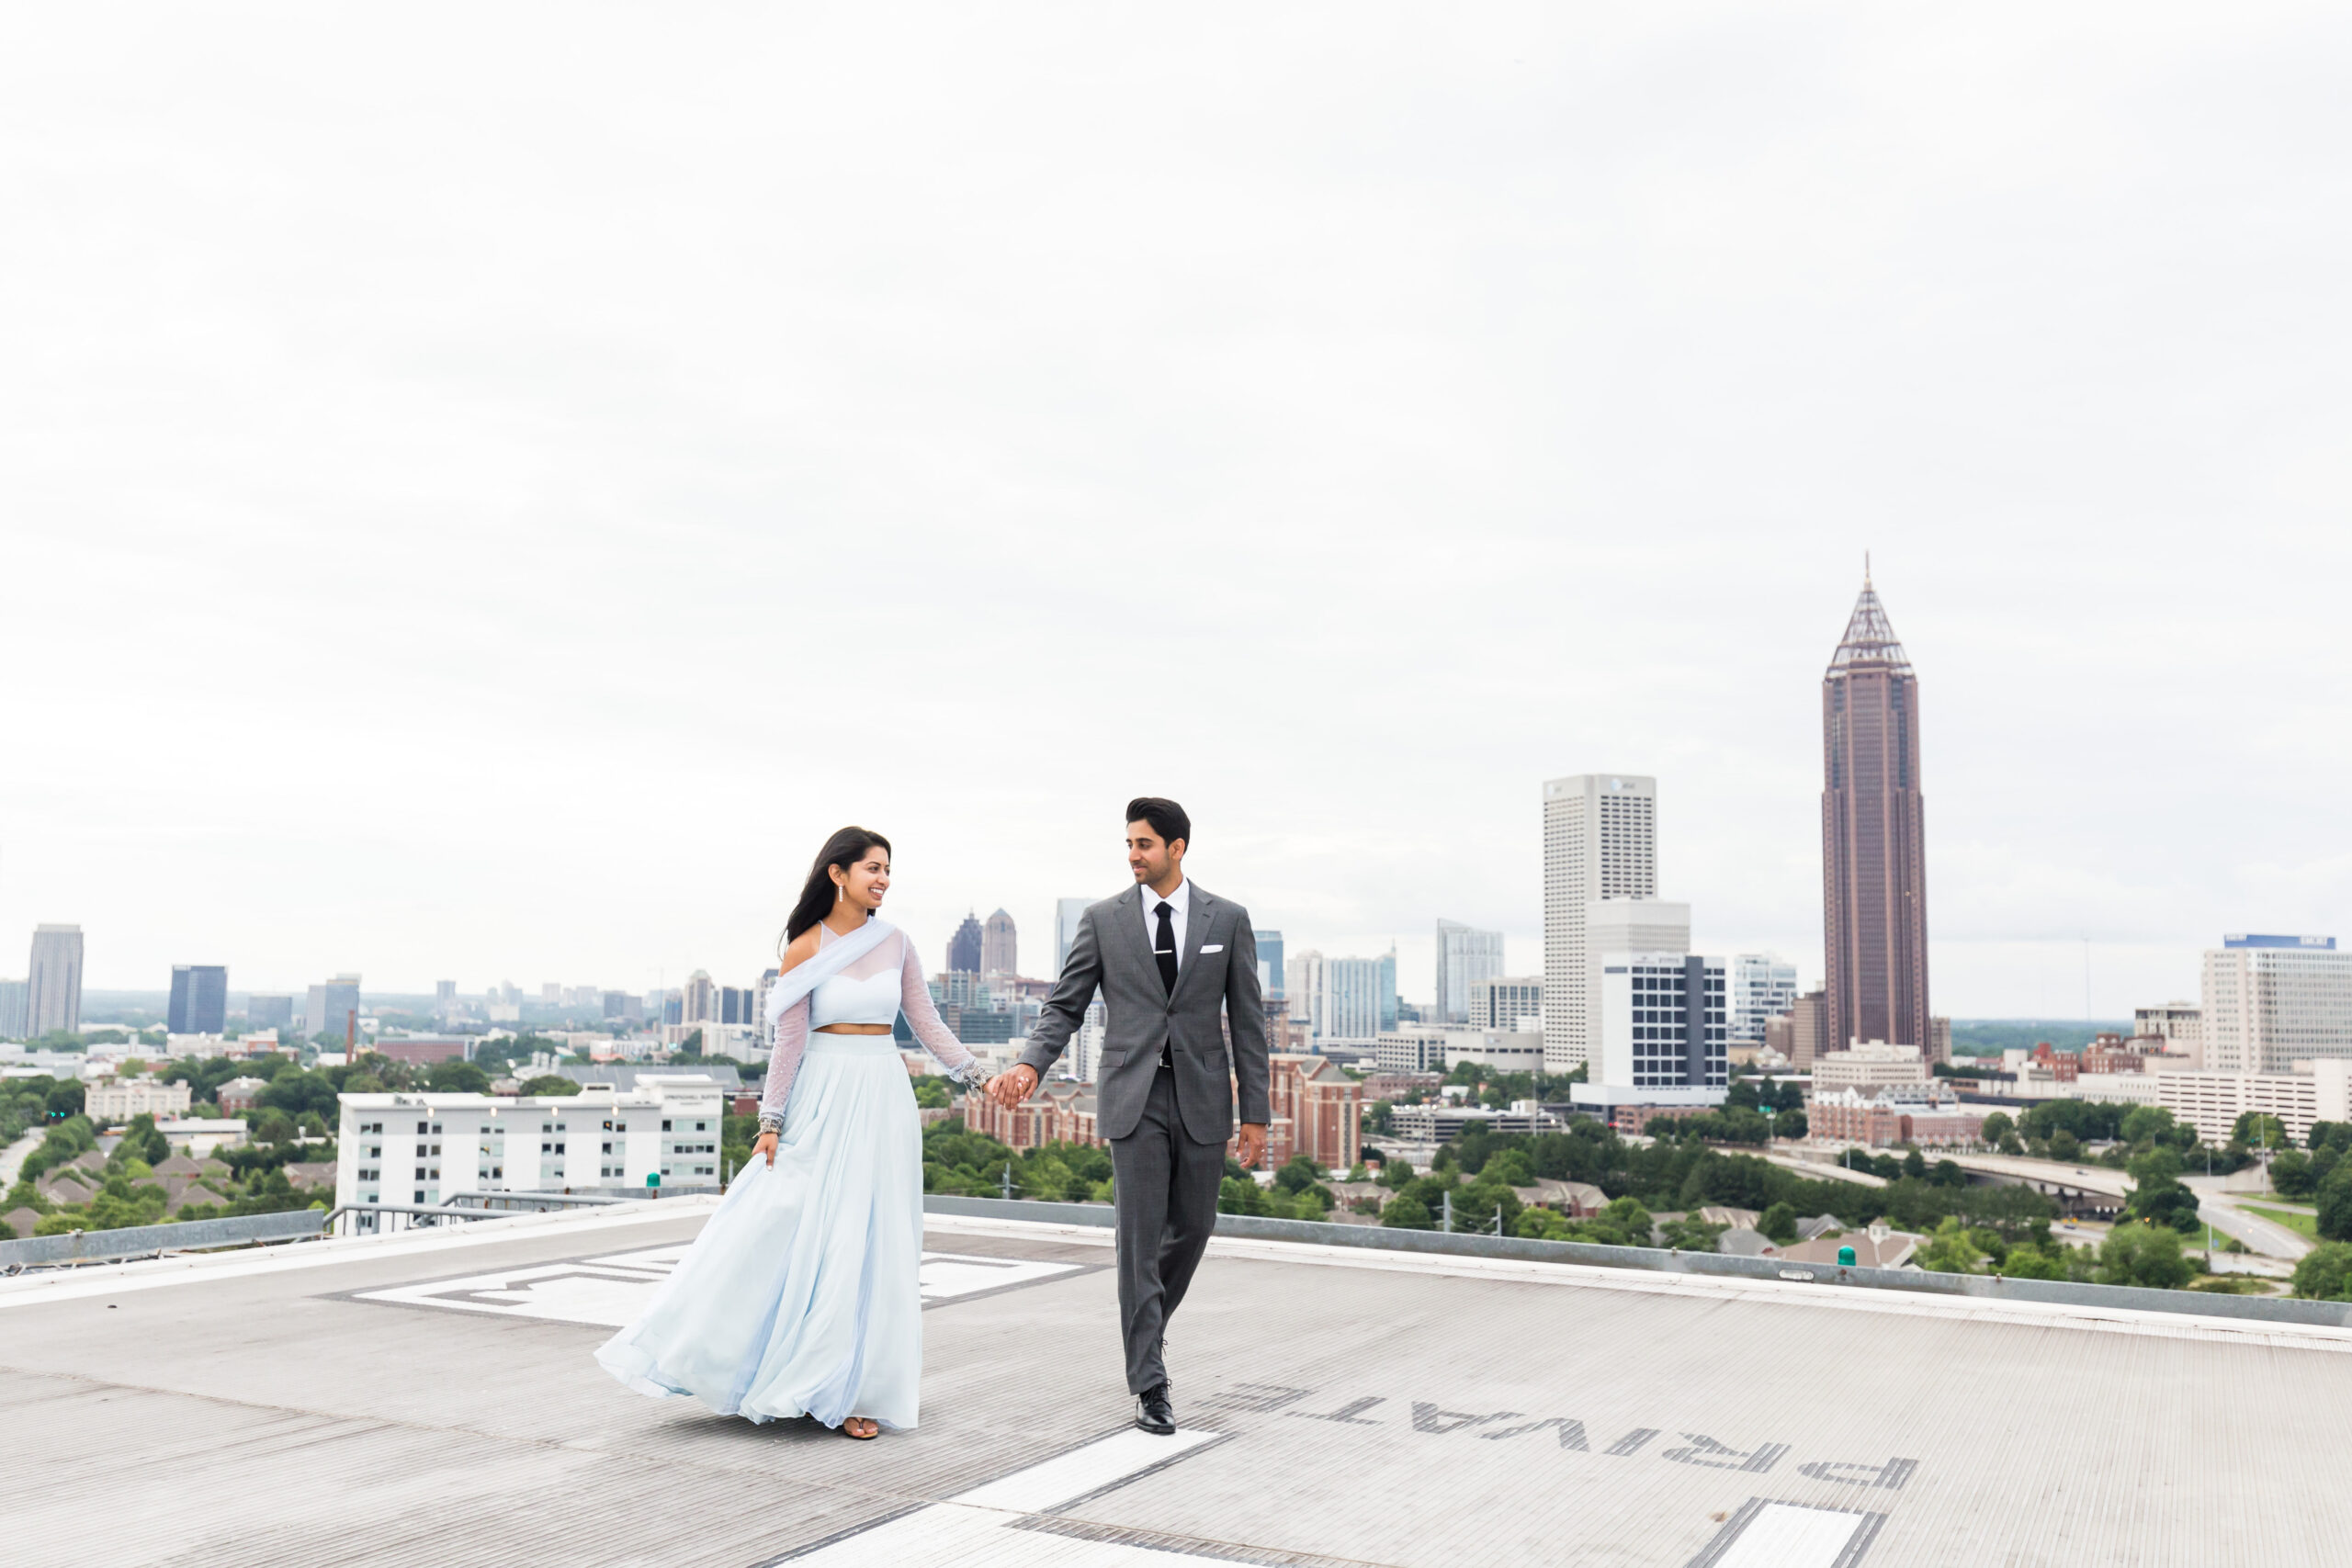 Bride and Groom on a rooftop looking at each other's eyes while walking